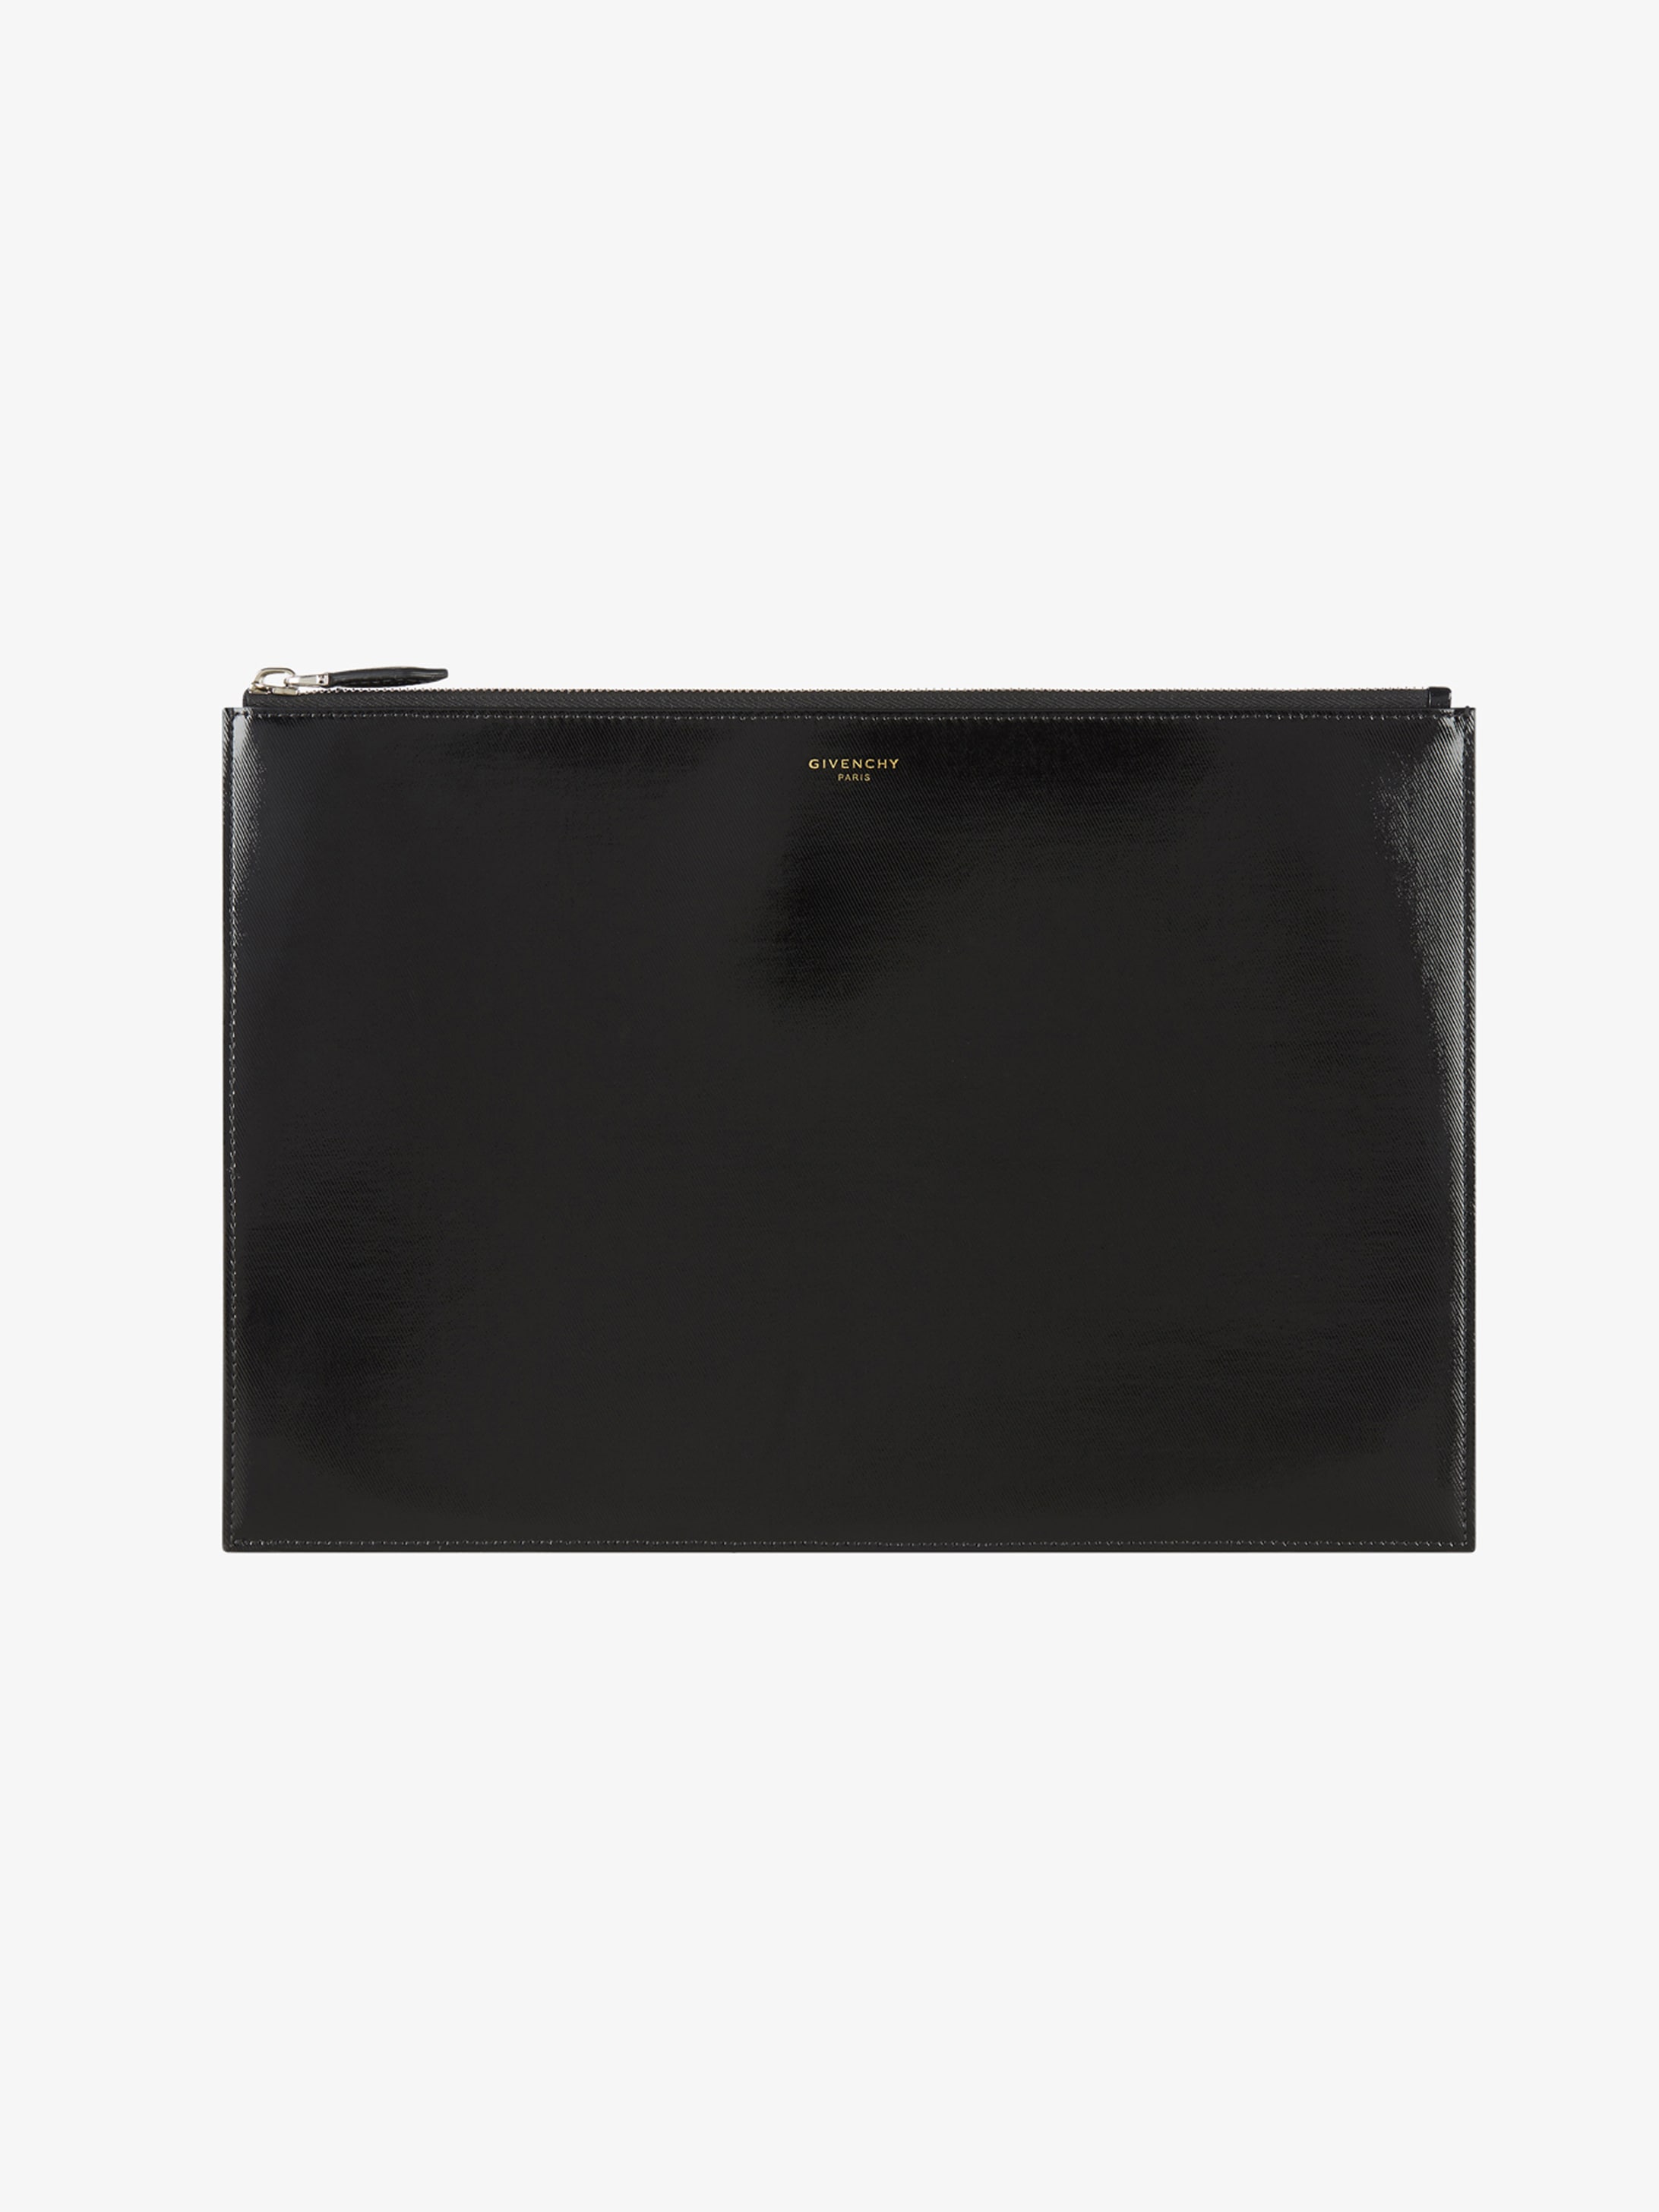 givenchy black pouch